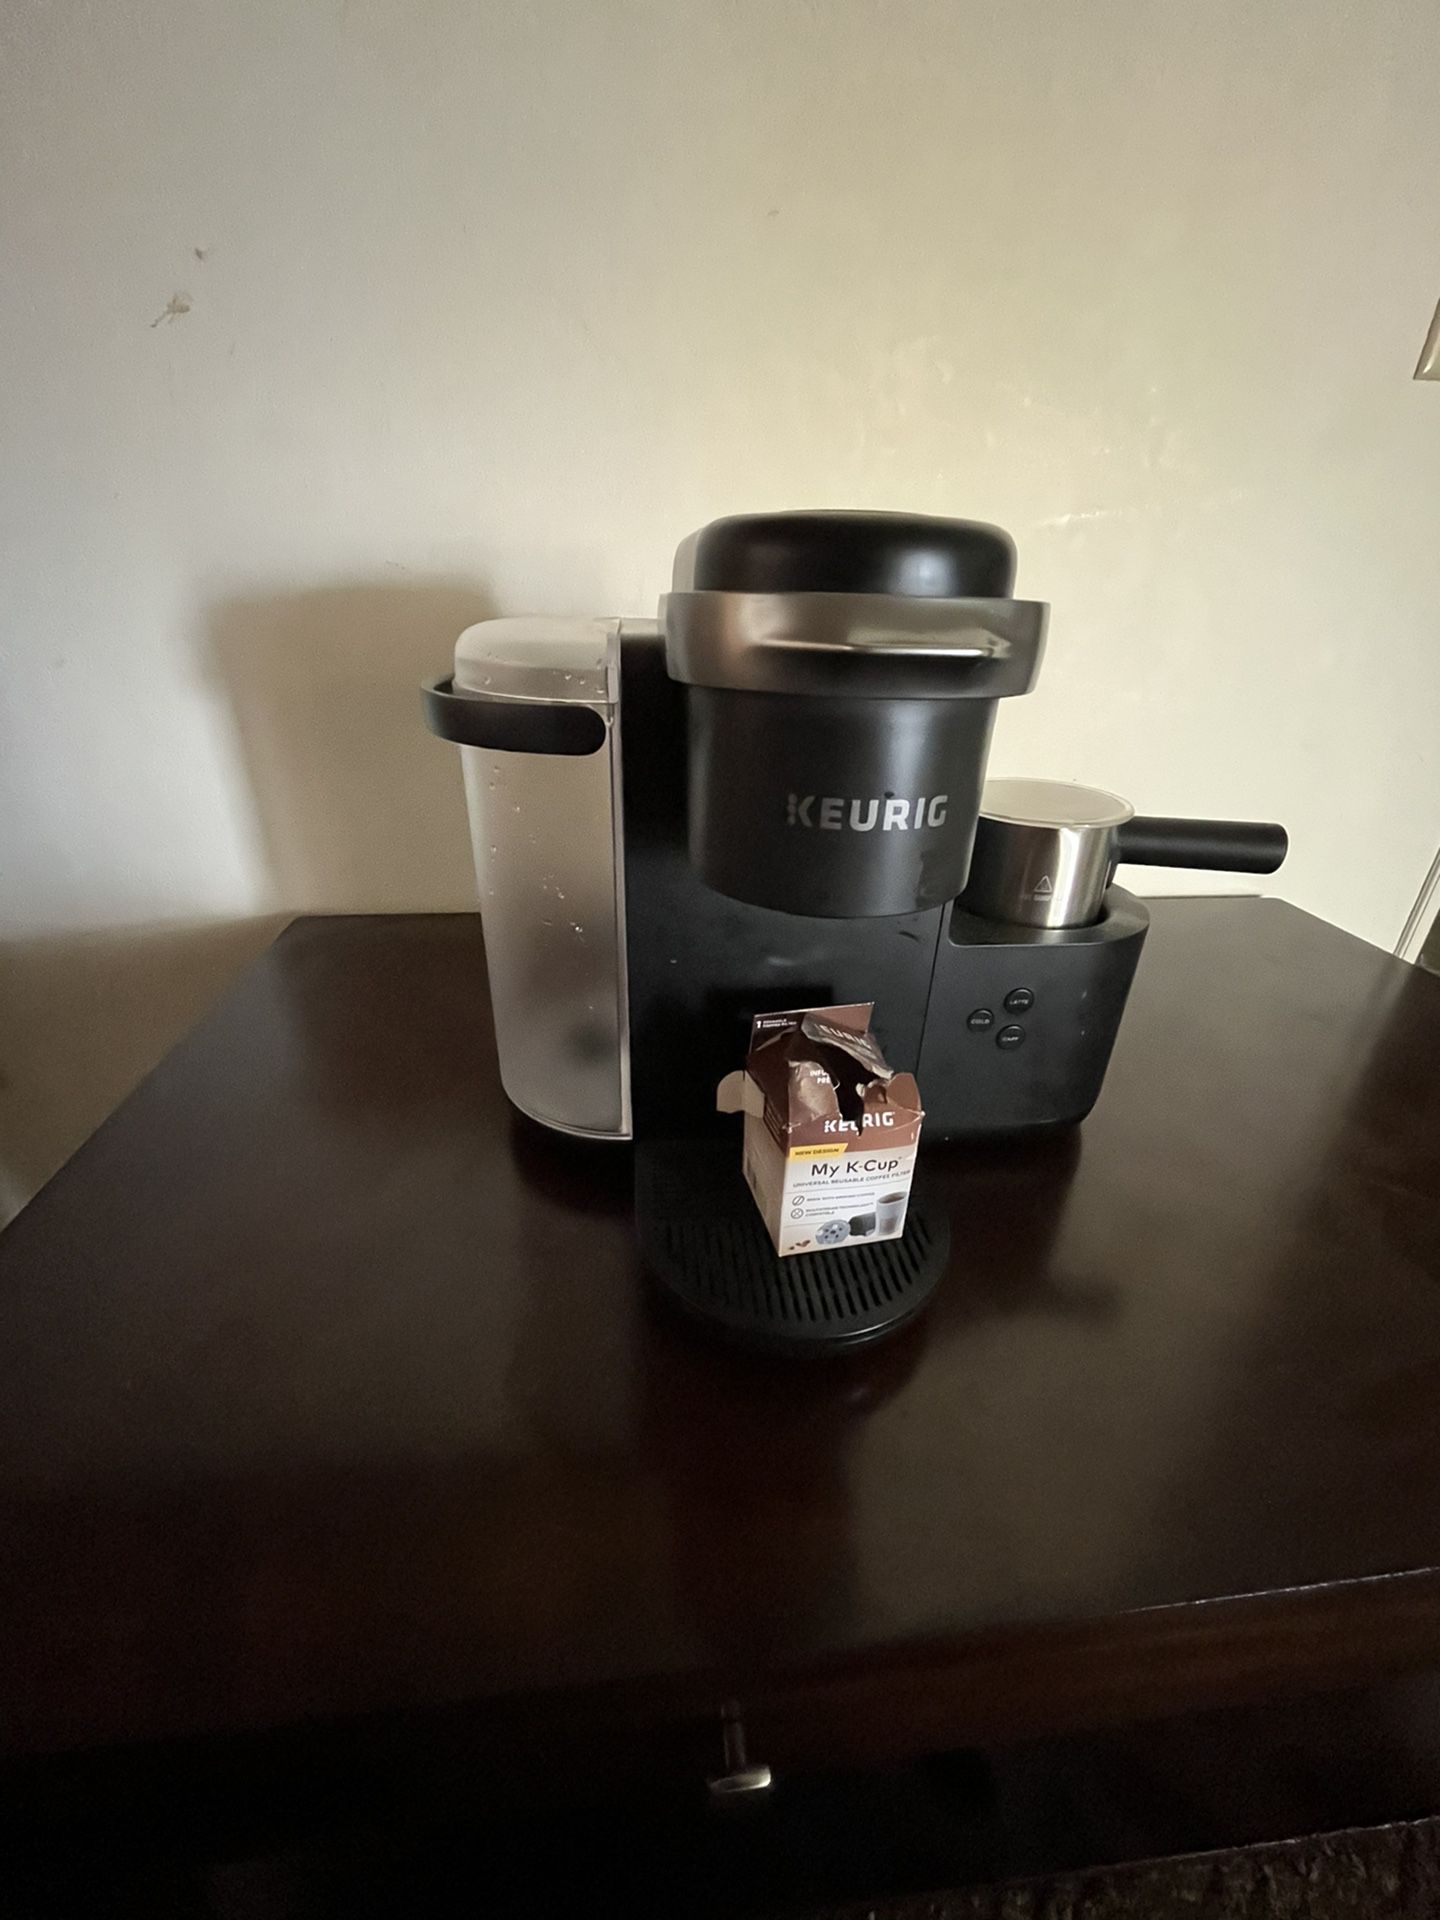 Keurig Coffee Maker And Milk Frother